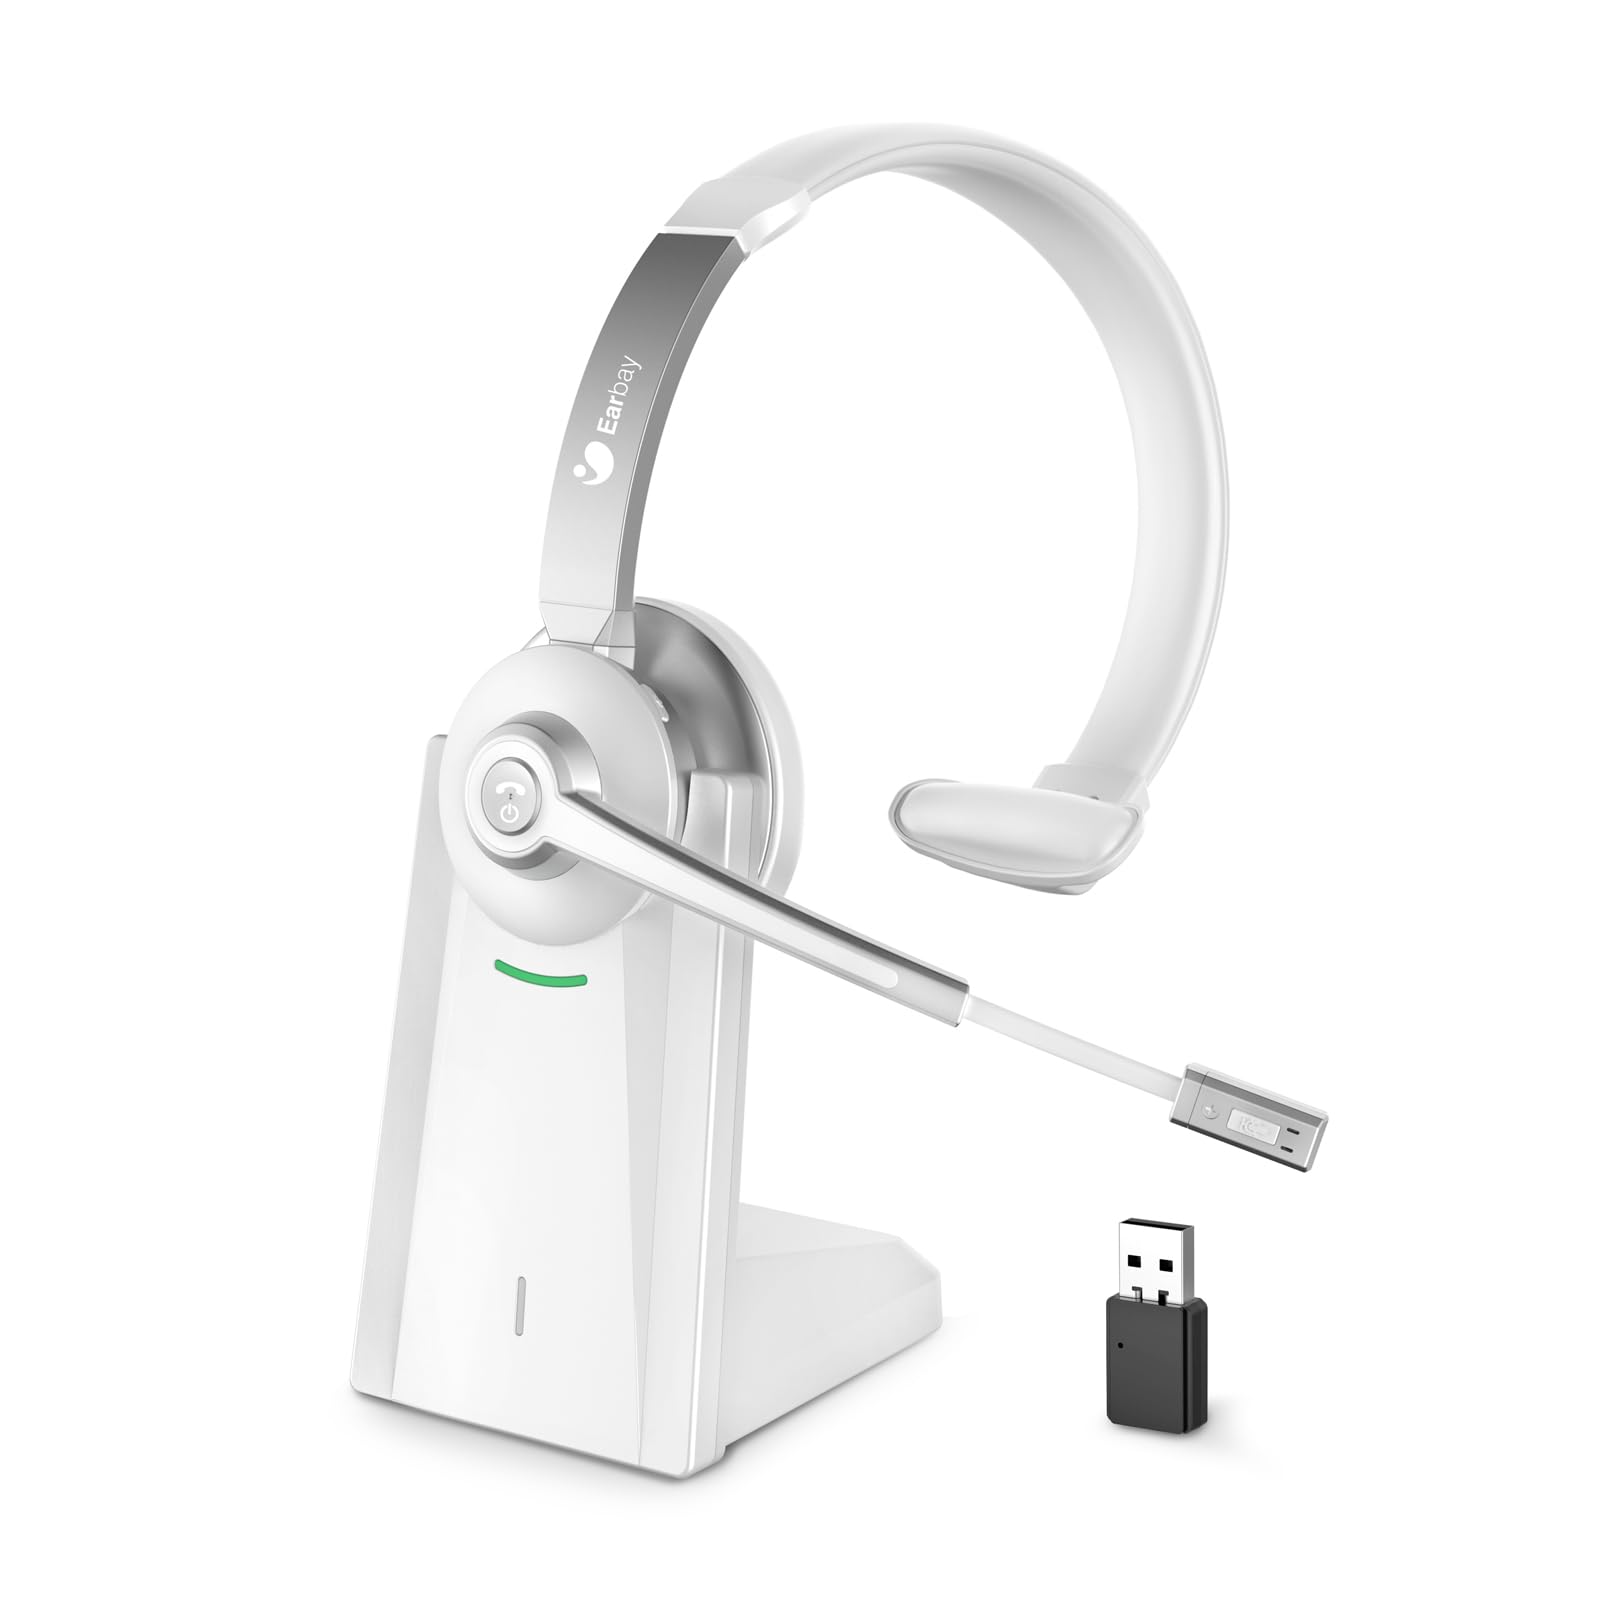 Earbay White Trucker Bluetooth Headset with Microphone, USB Dongle & Charging Base BT783MB-CD